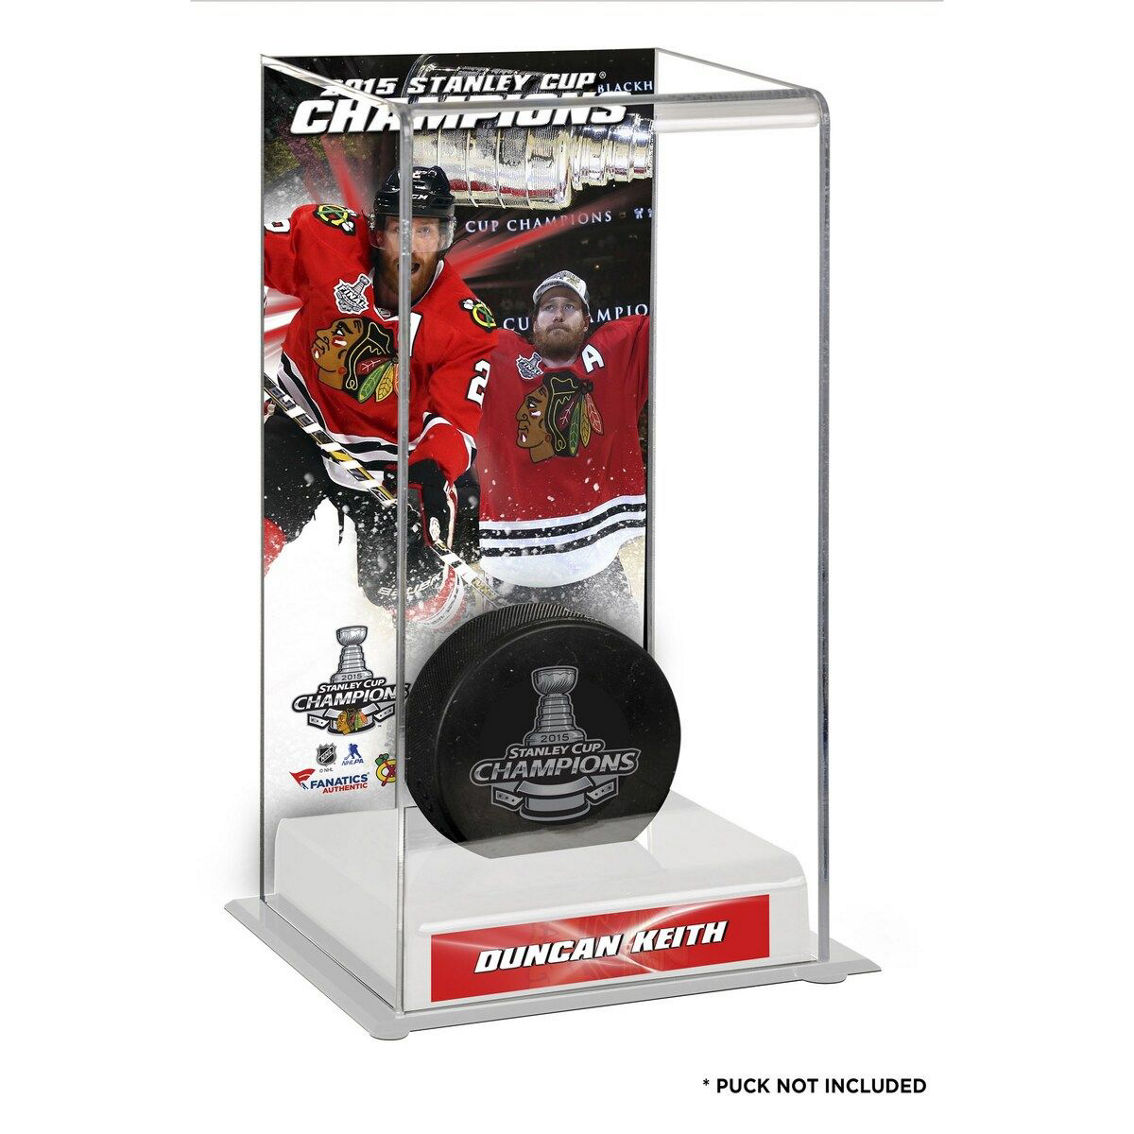 Fanatics Authentic Duncan Keith Chicago Blackhawks 2015 Stanley Cup s Logo Deluxe Puck Case - Image 2 of 2